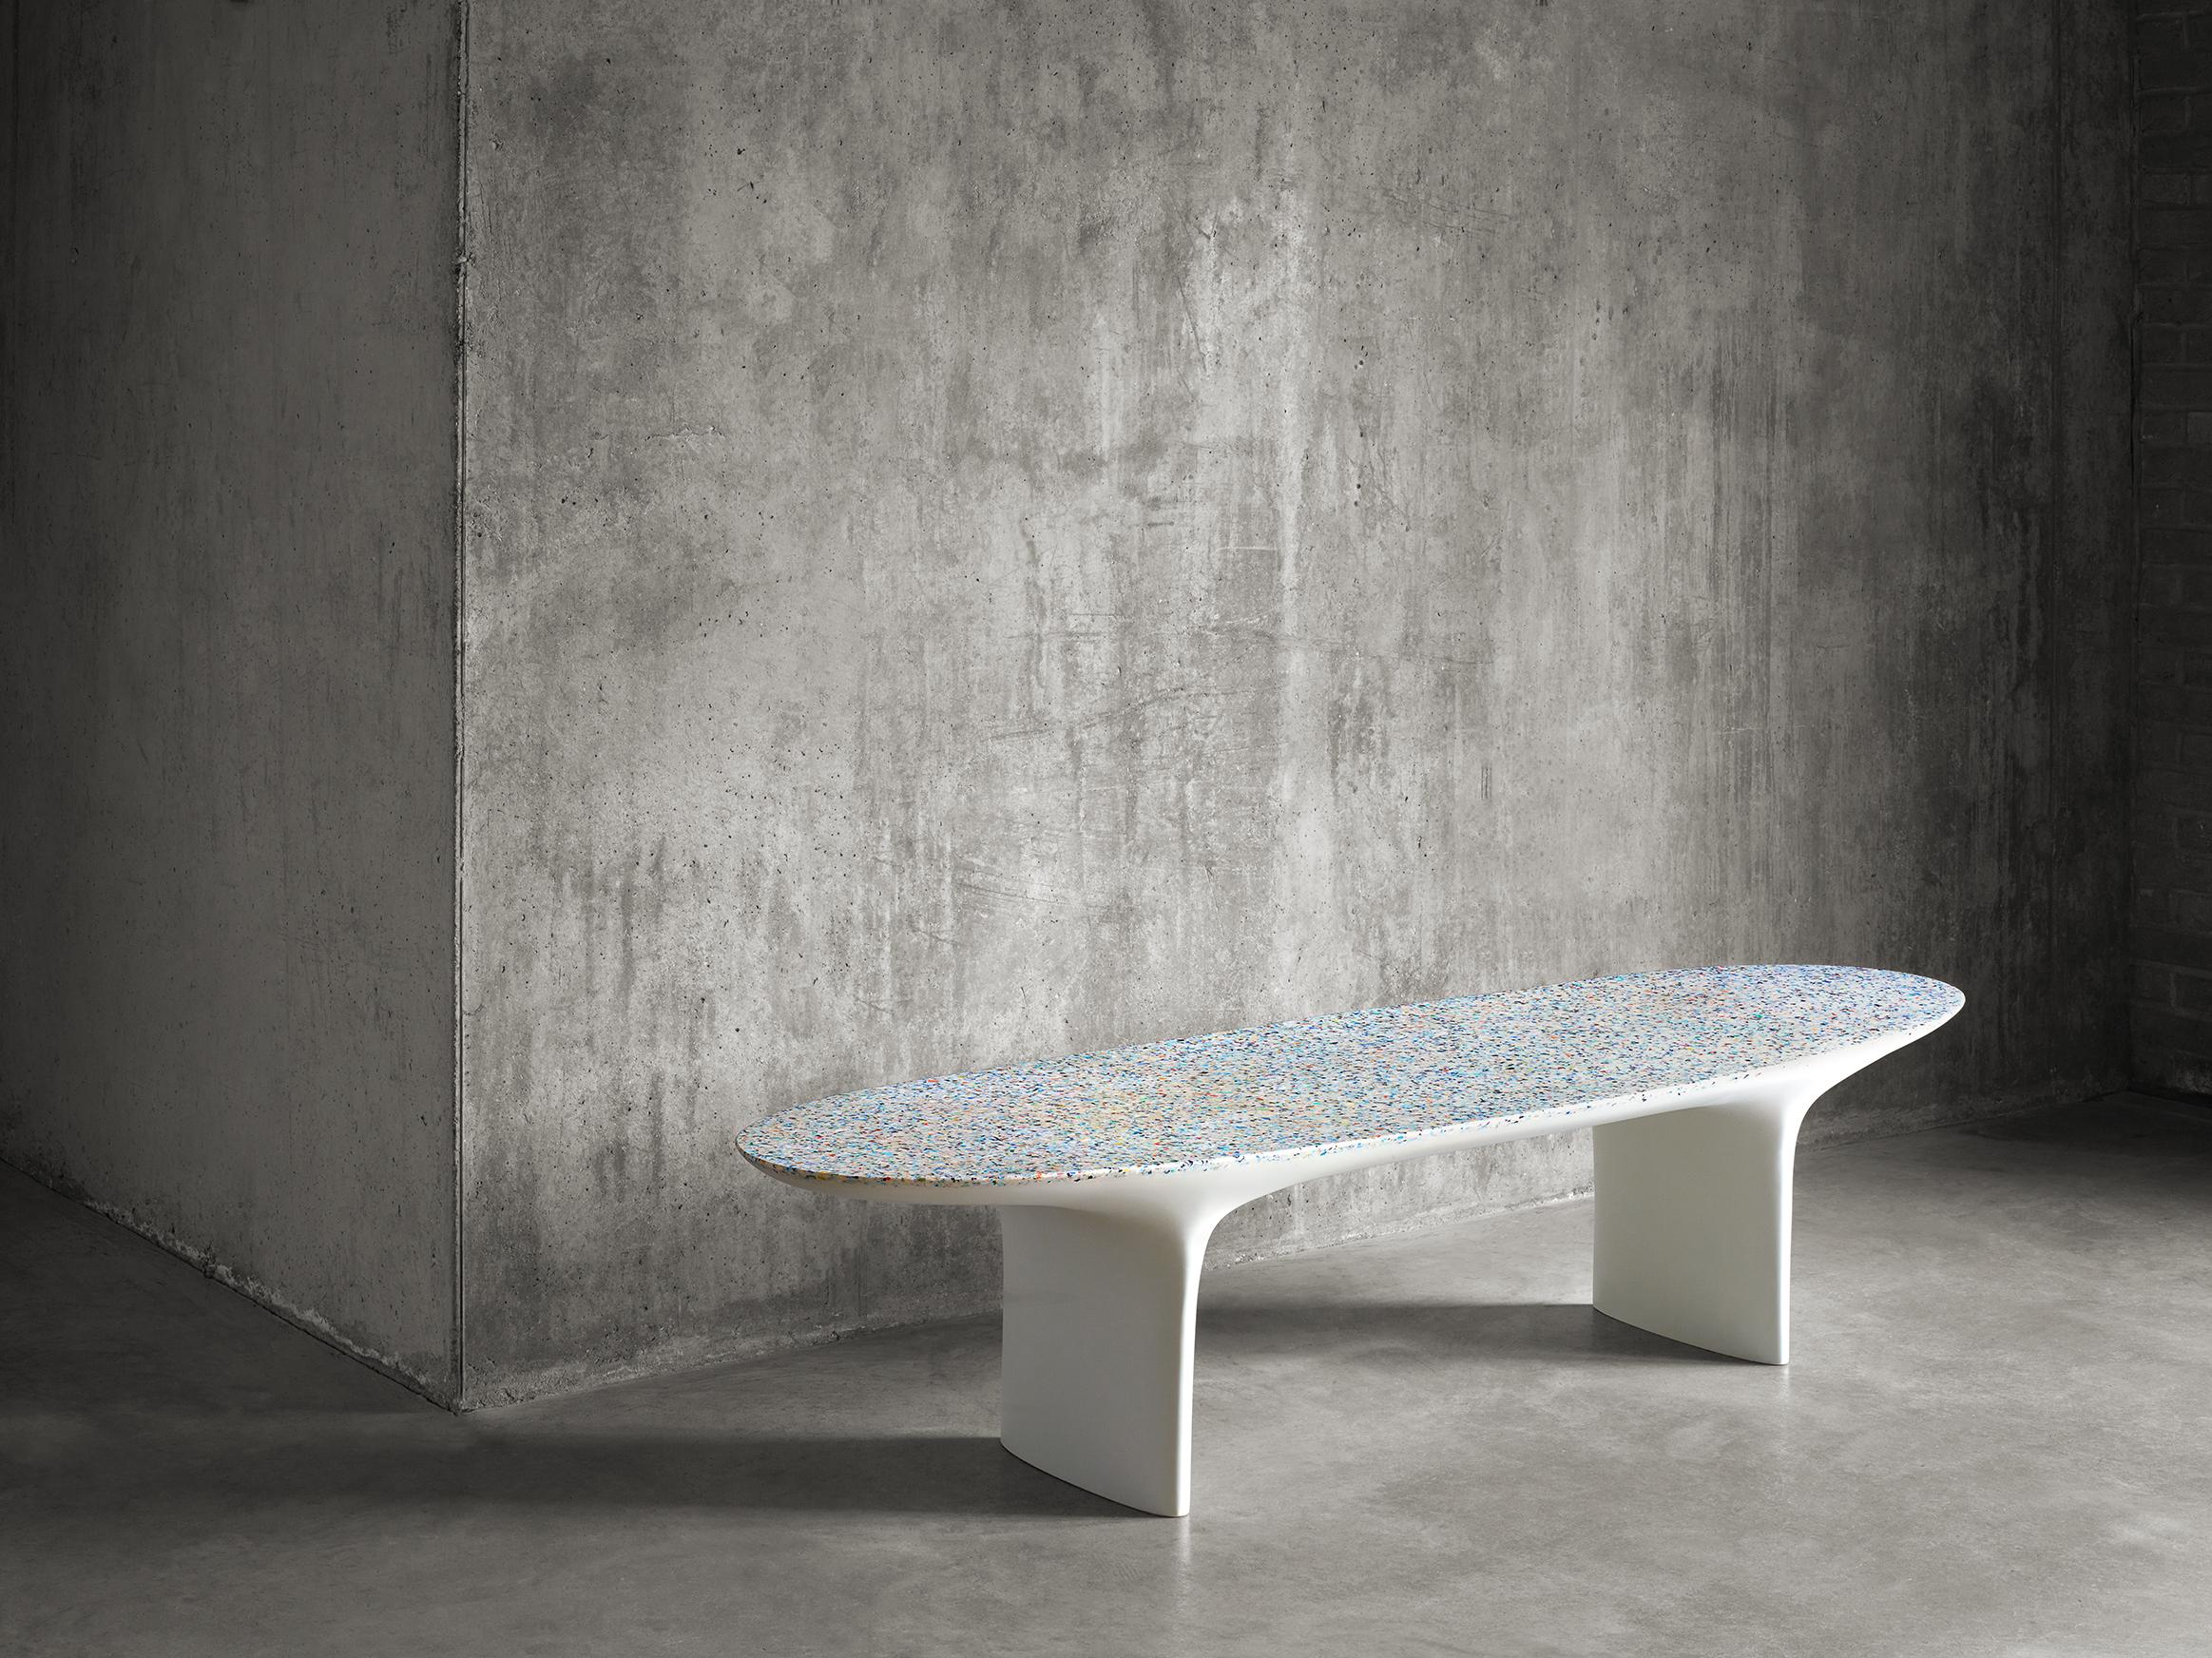 The Flotsam bench is produced using the innovative ocean terrazzo material developed by Brodie Neill using reclaimed and recycled fragments of ocean plastic. Cast completely as a singular piece by artisans in the UK, the bench seat takes its name